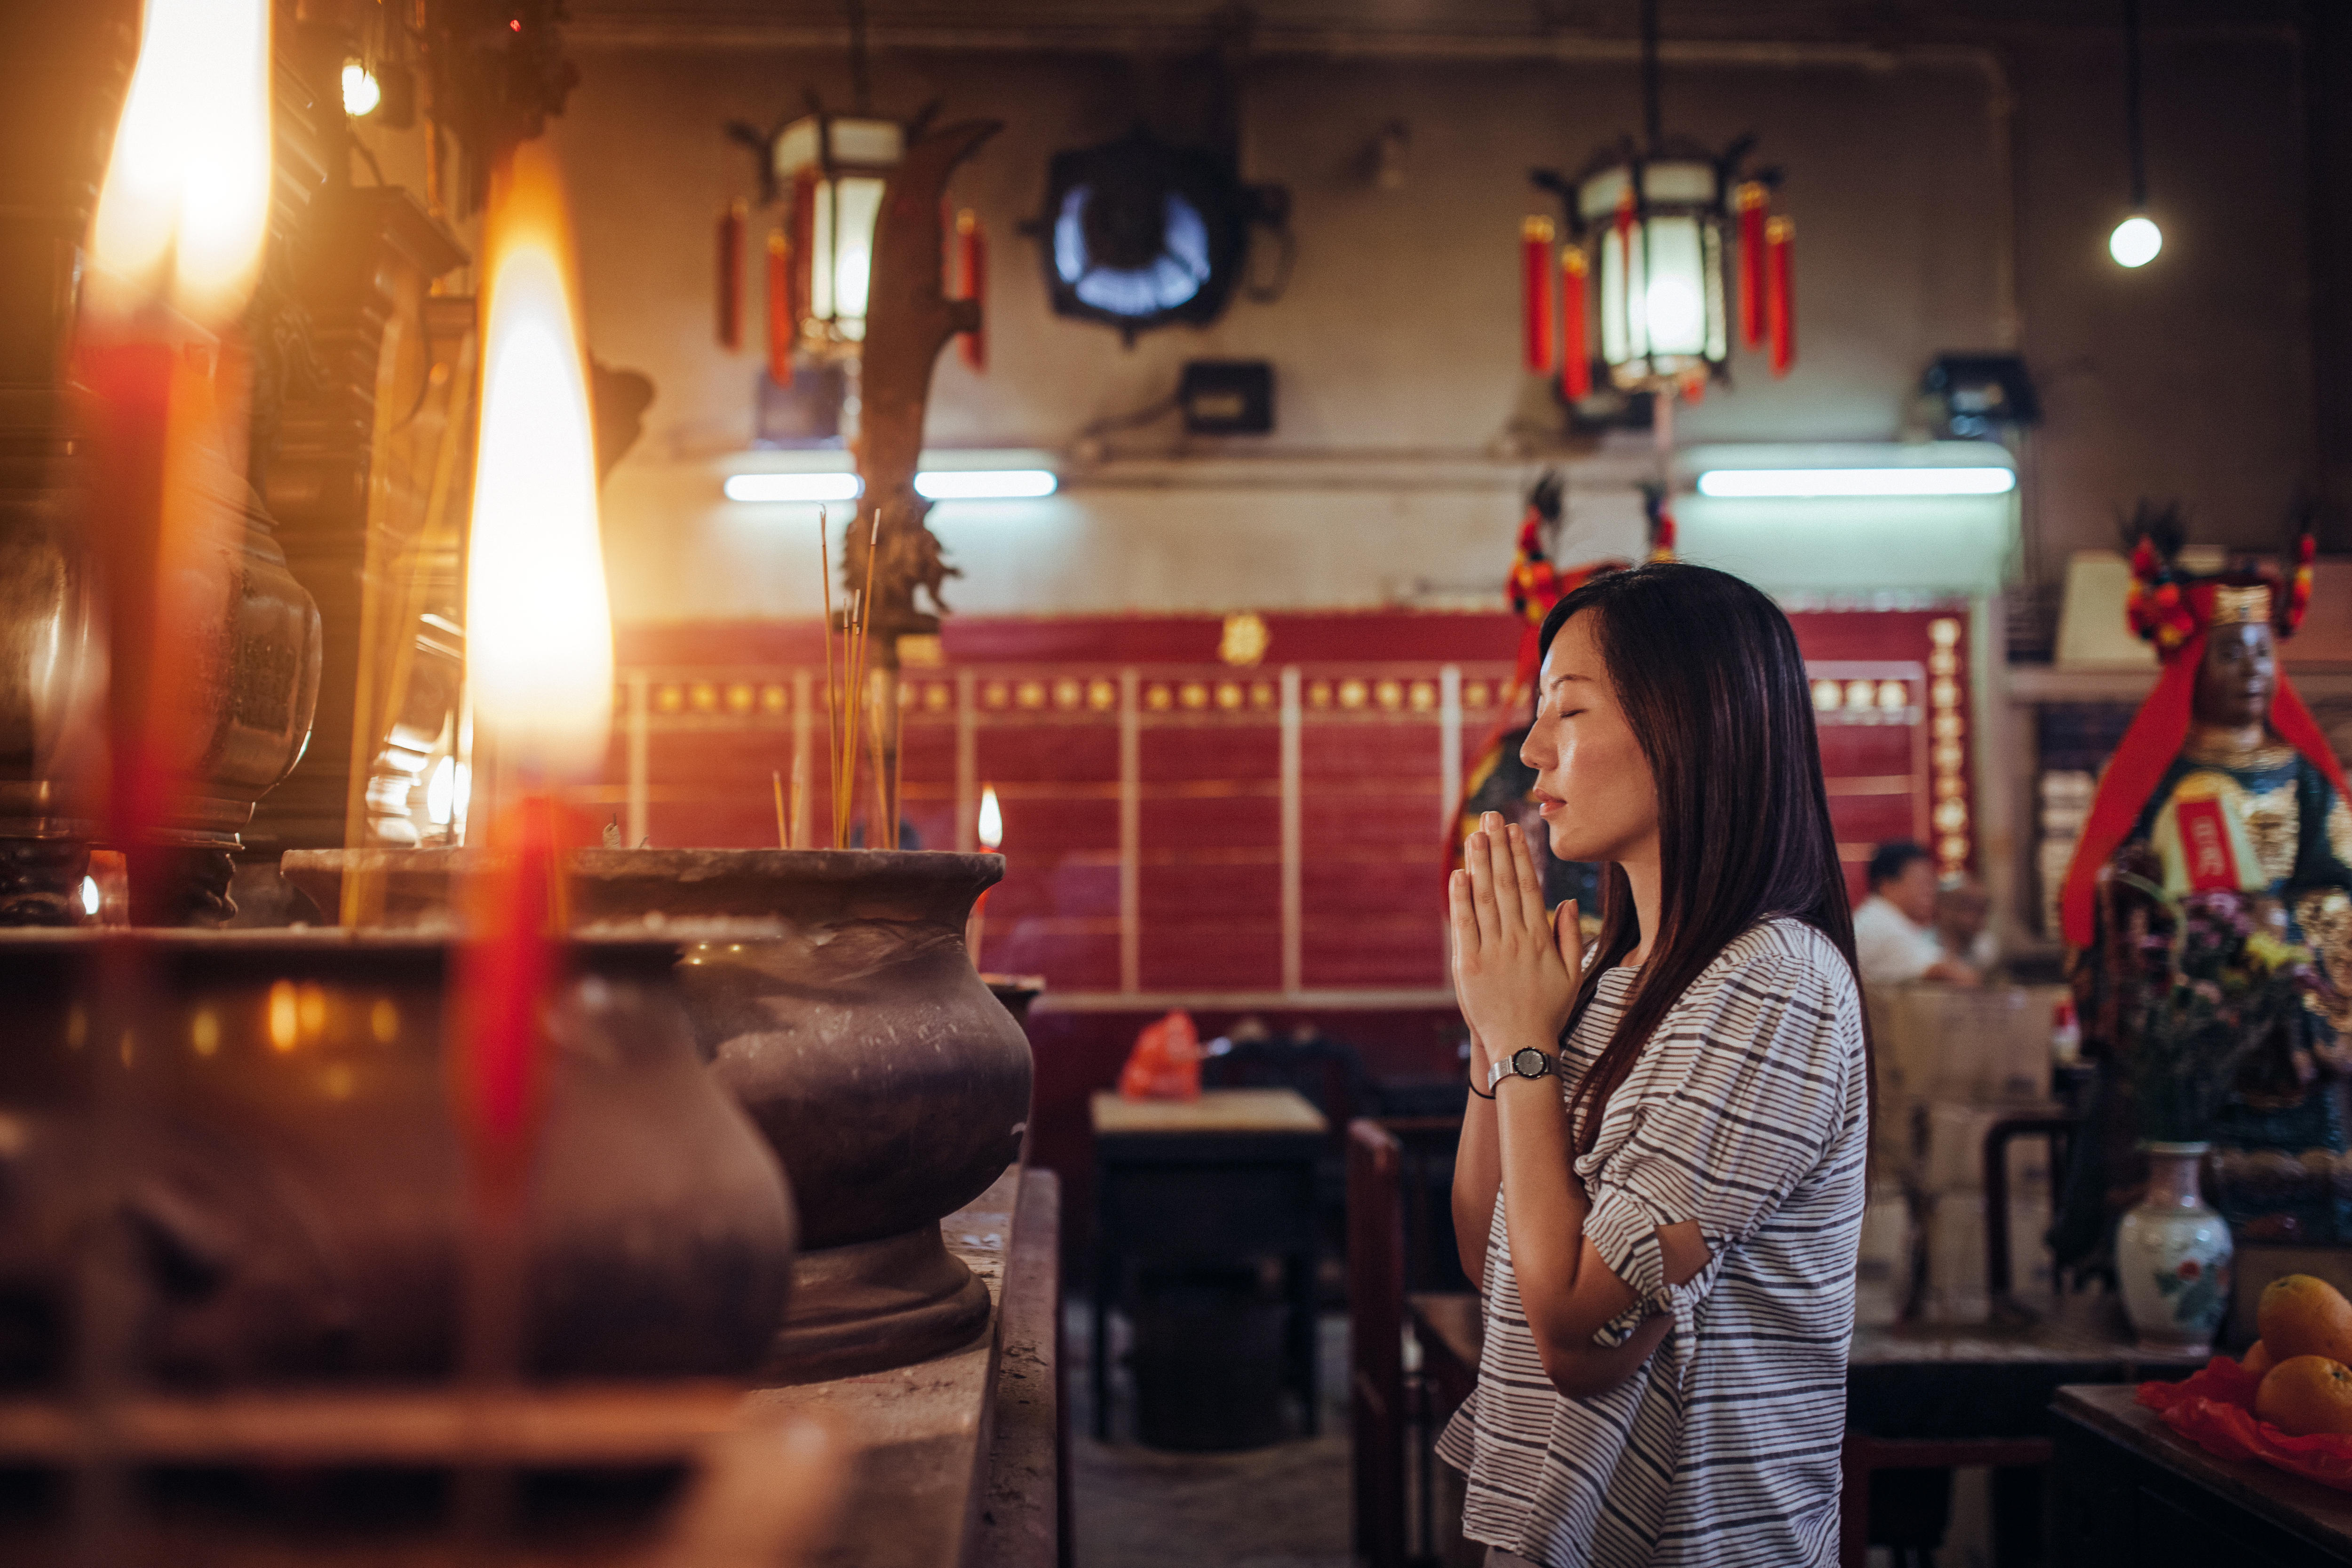 Is religion still booming in China?